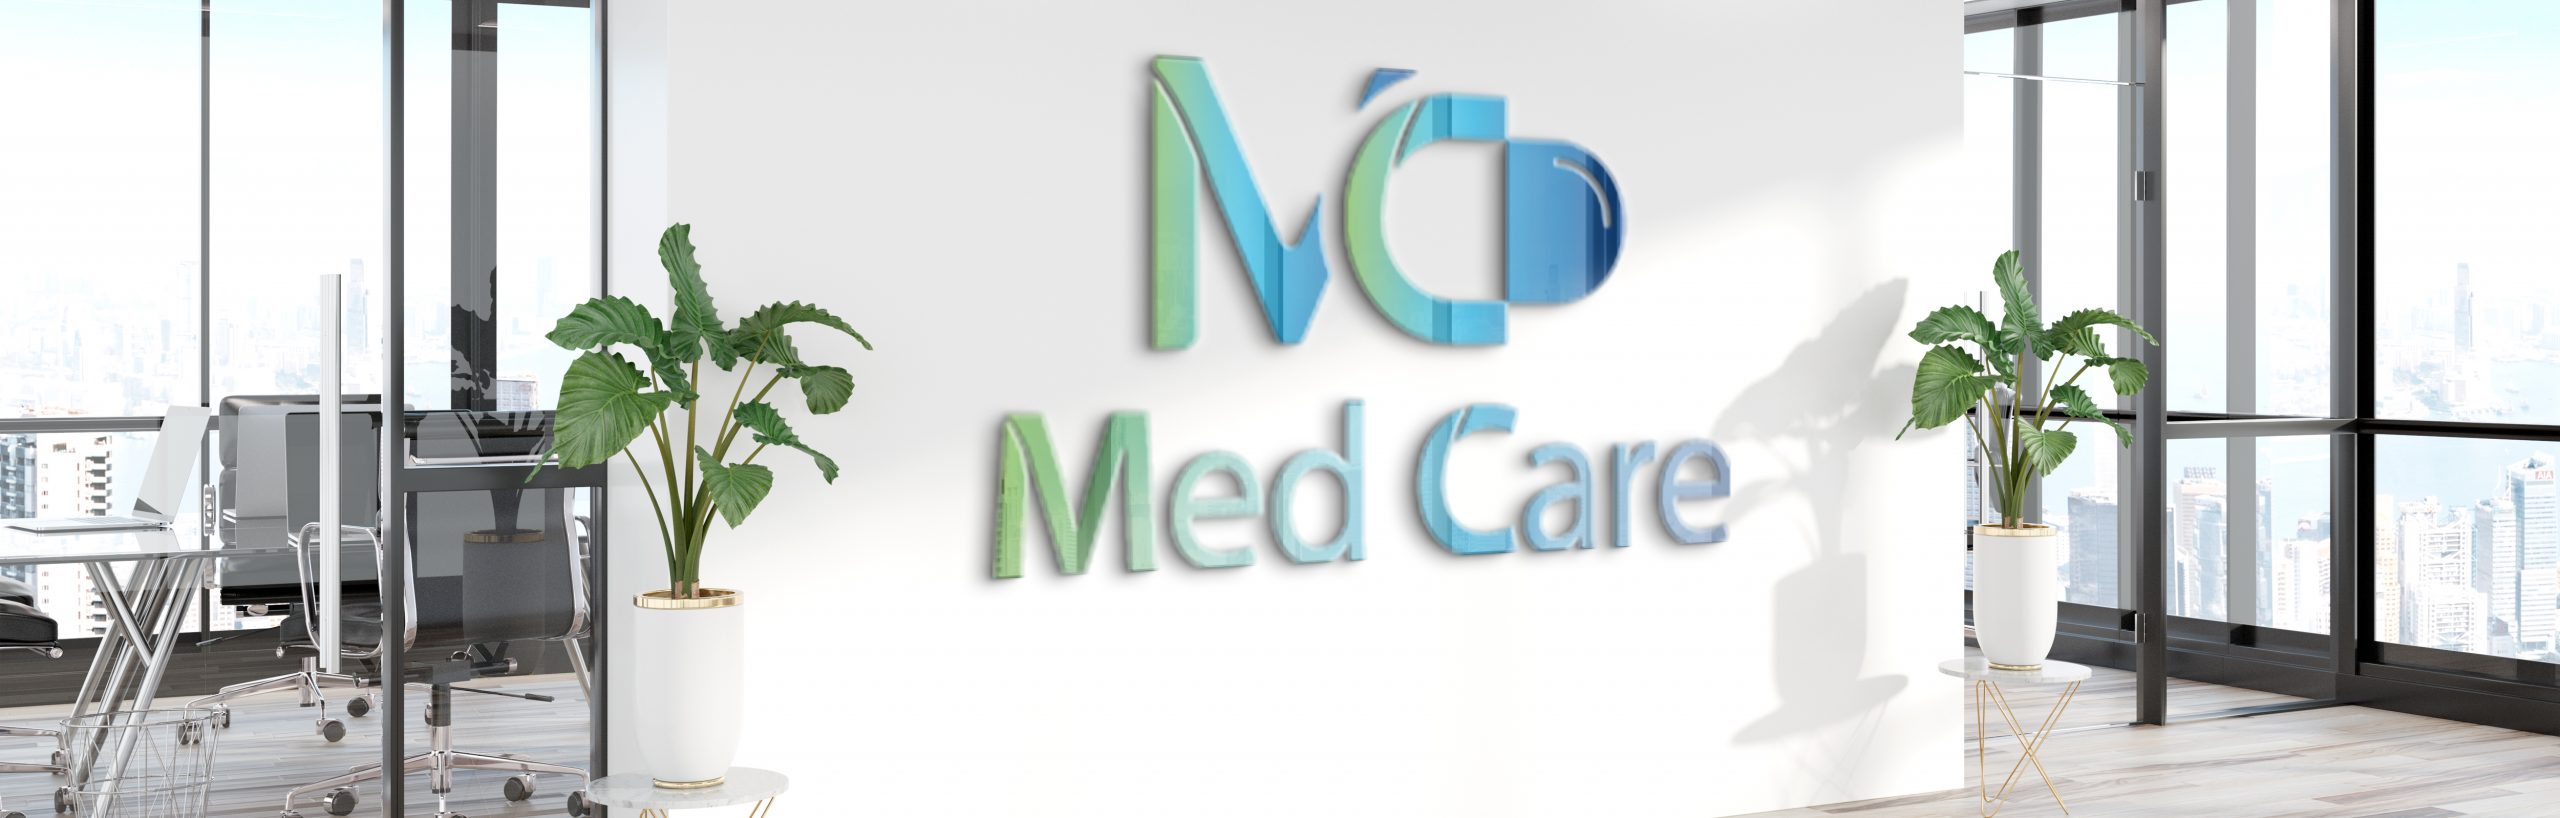 Med Care Careers